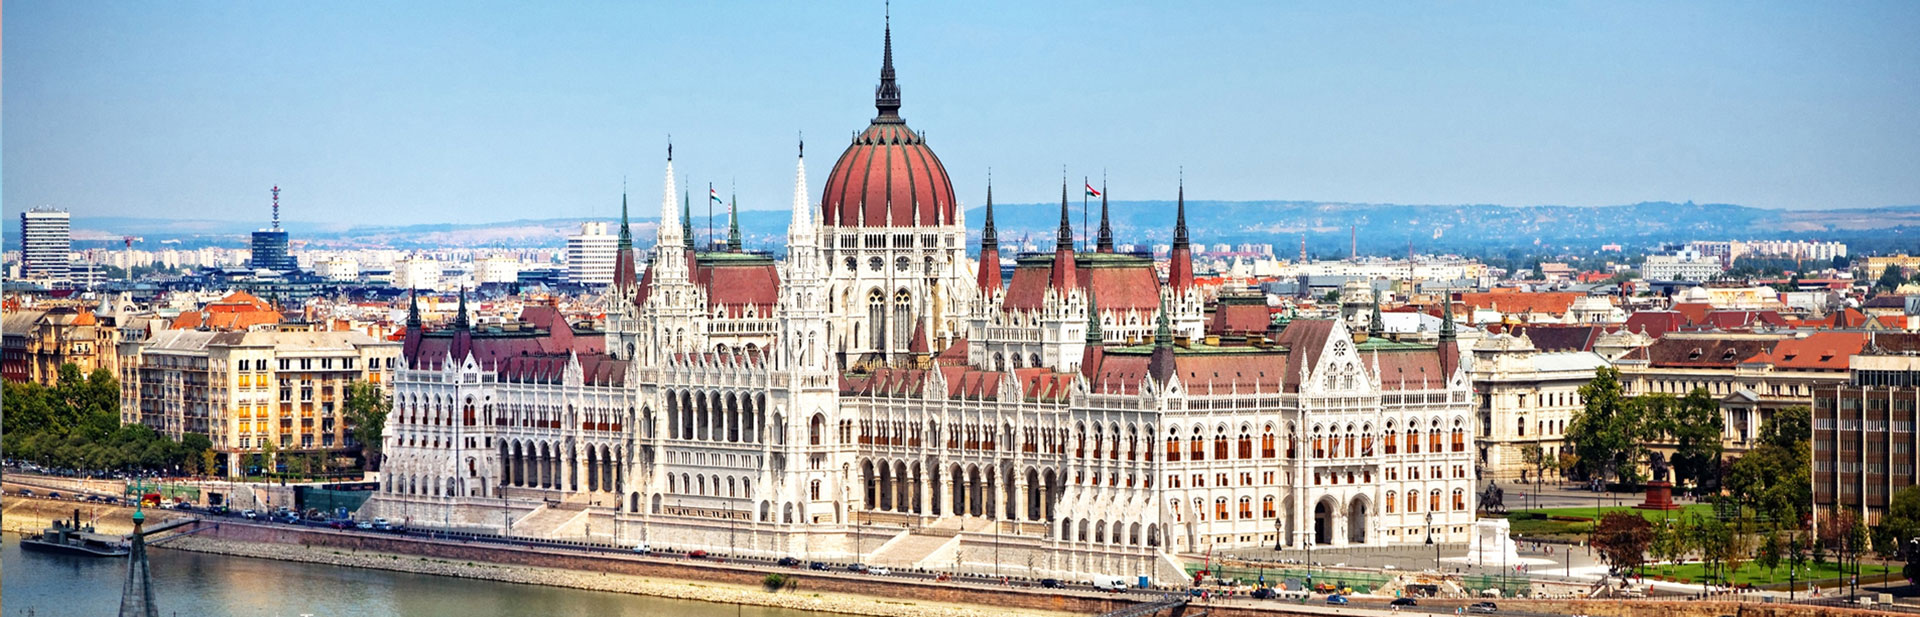 Study in Hungary for Indian Students | Uniselect International